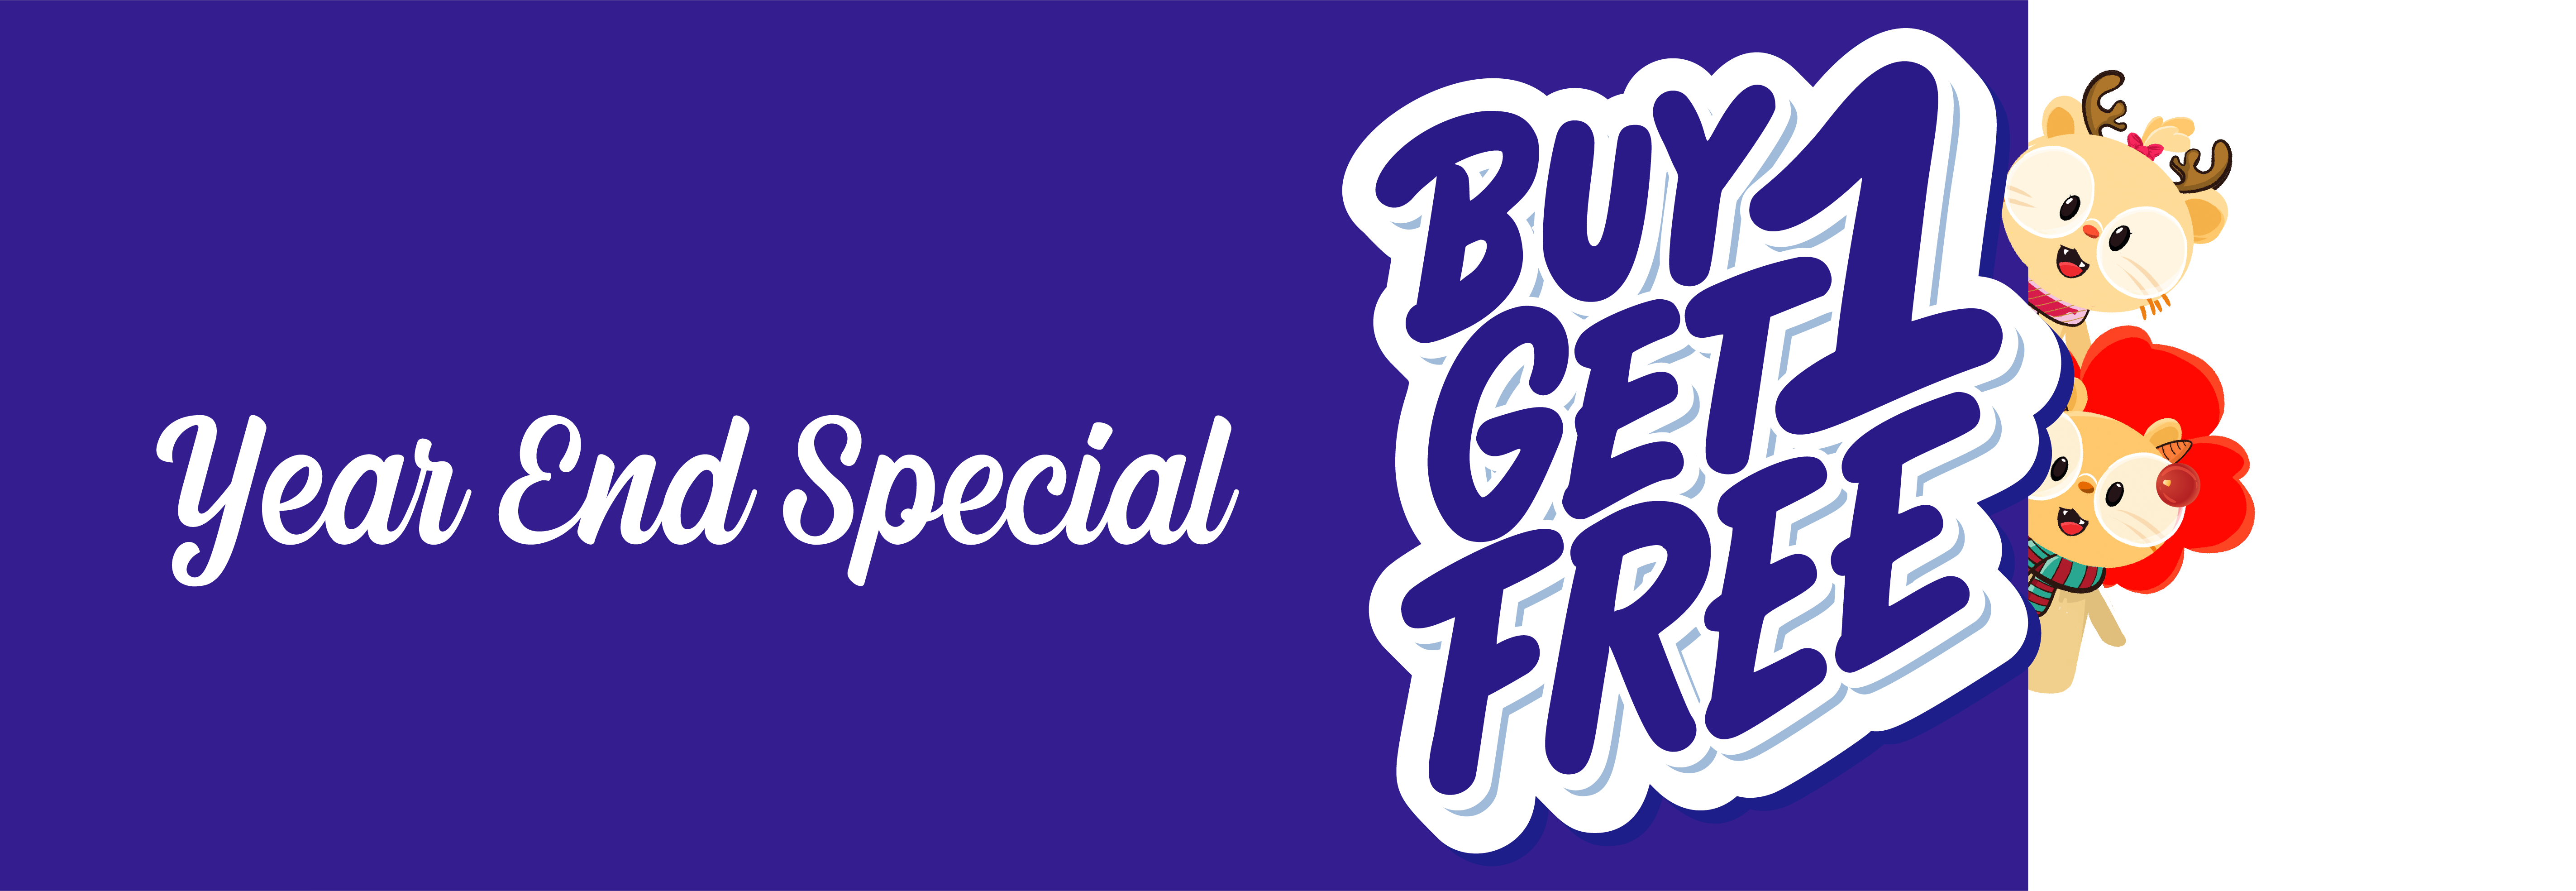 Year end Special - Buy 1 Free 1